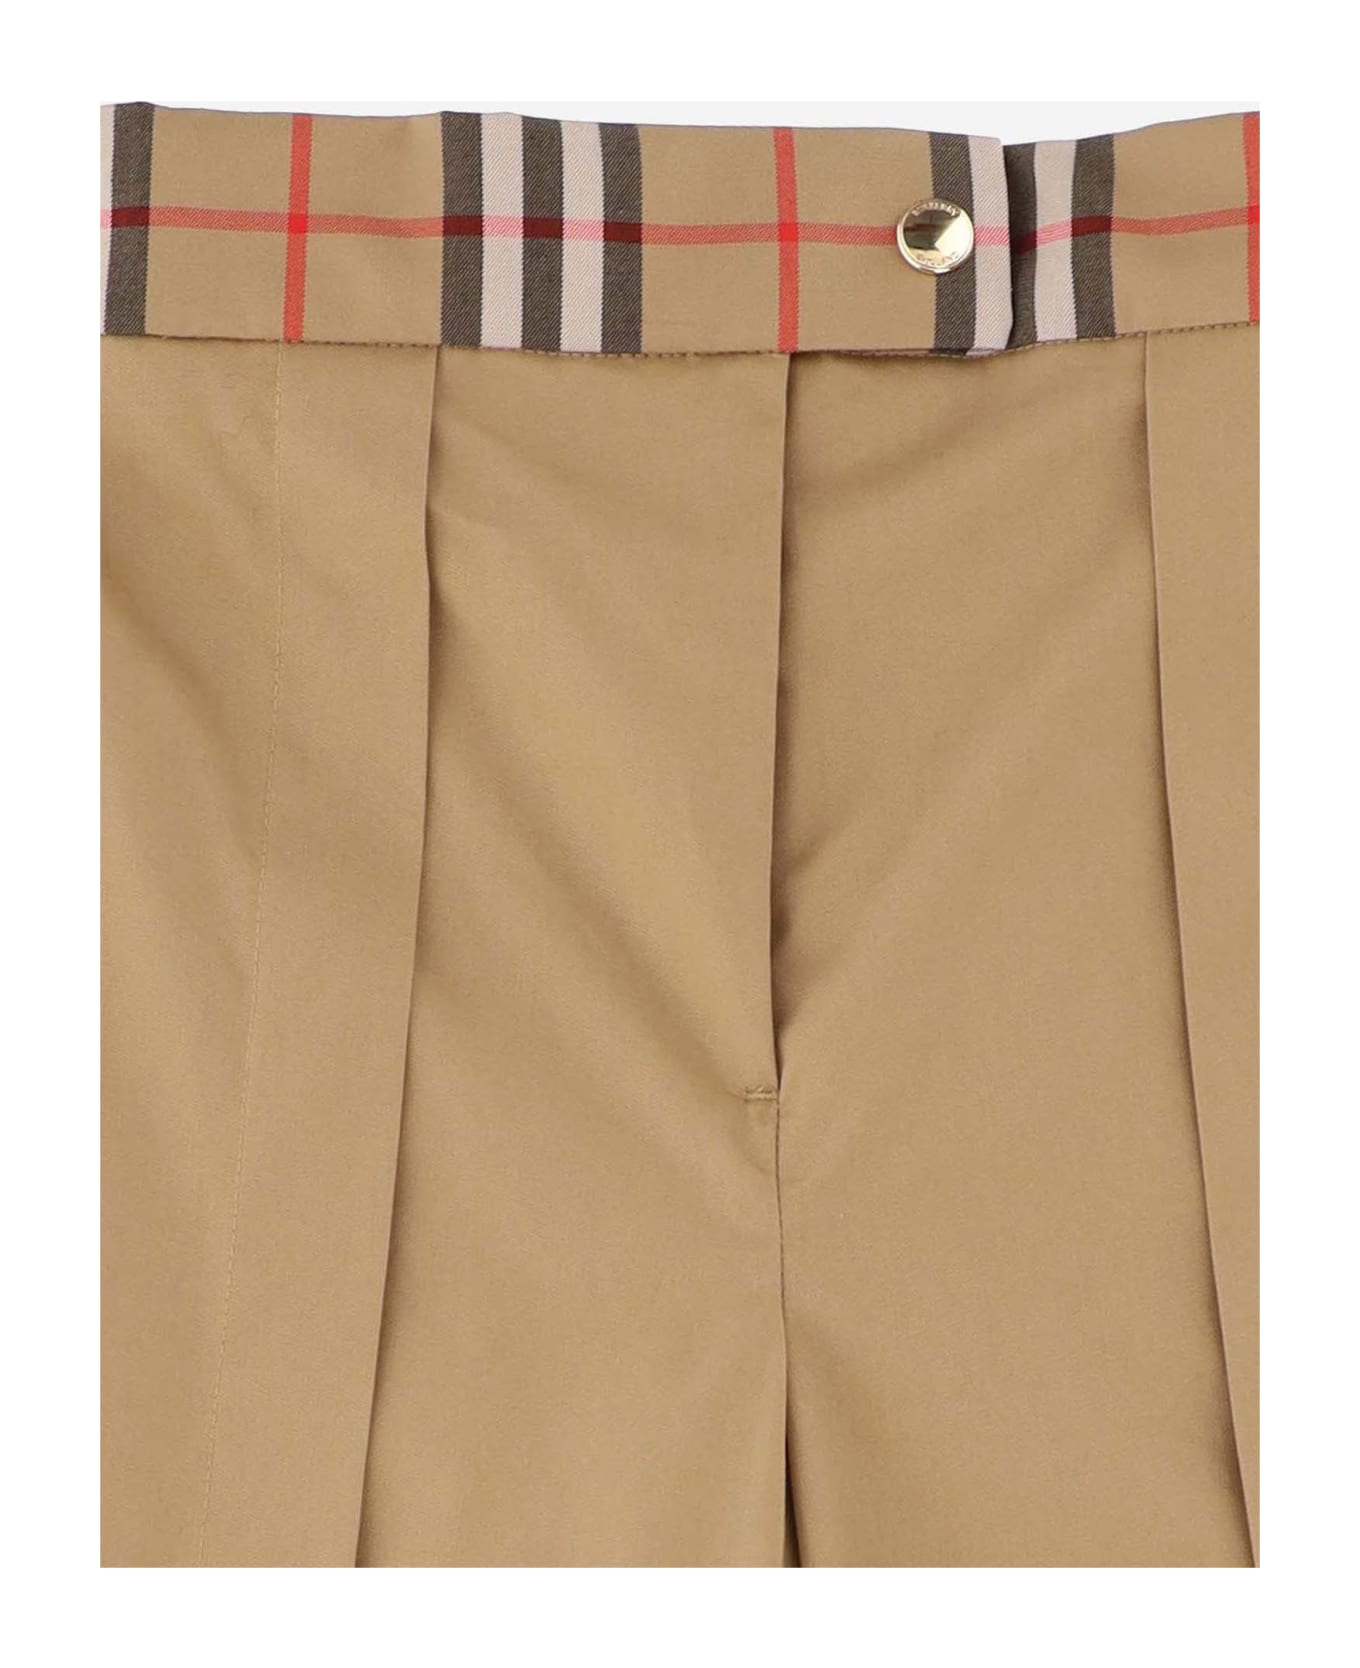 Burberry Cotton Pants With Check Details - Beige